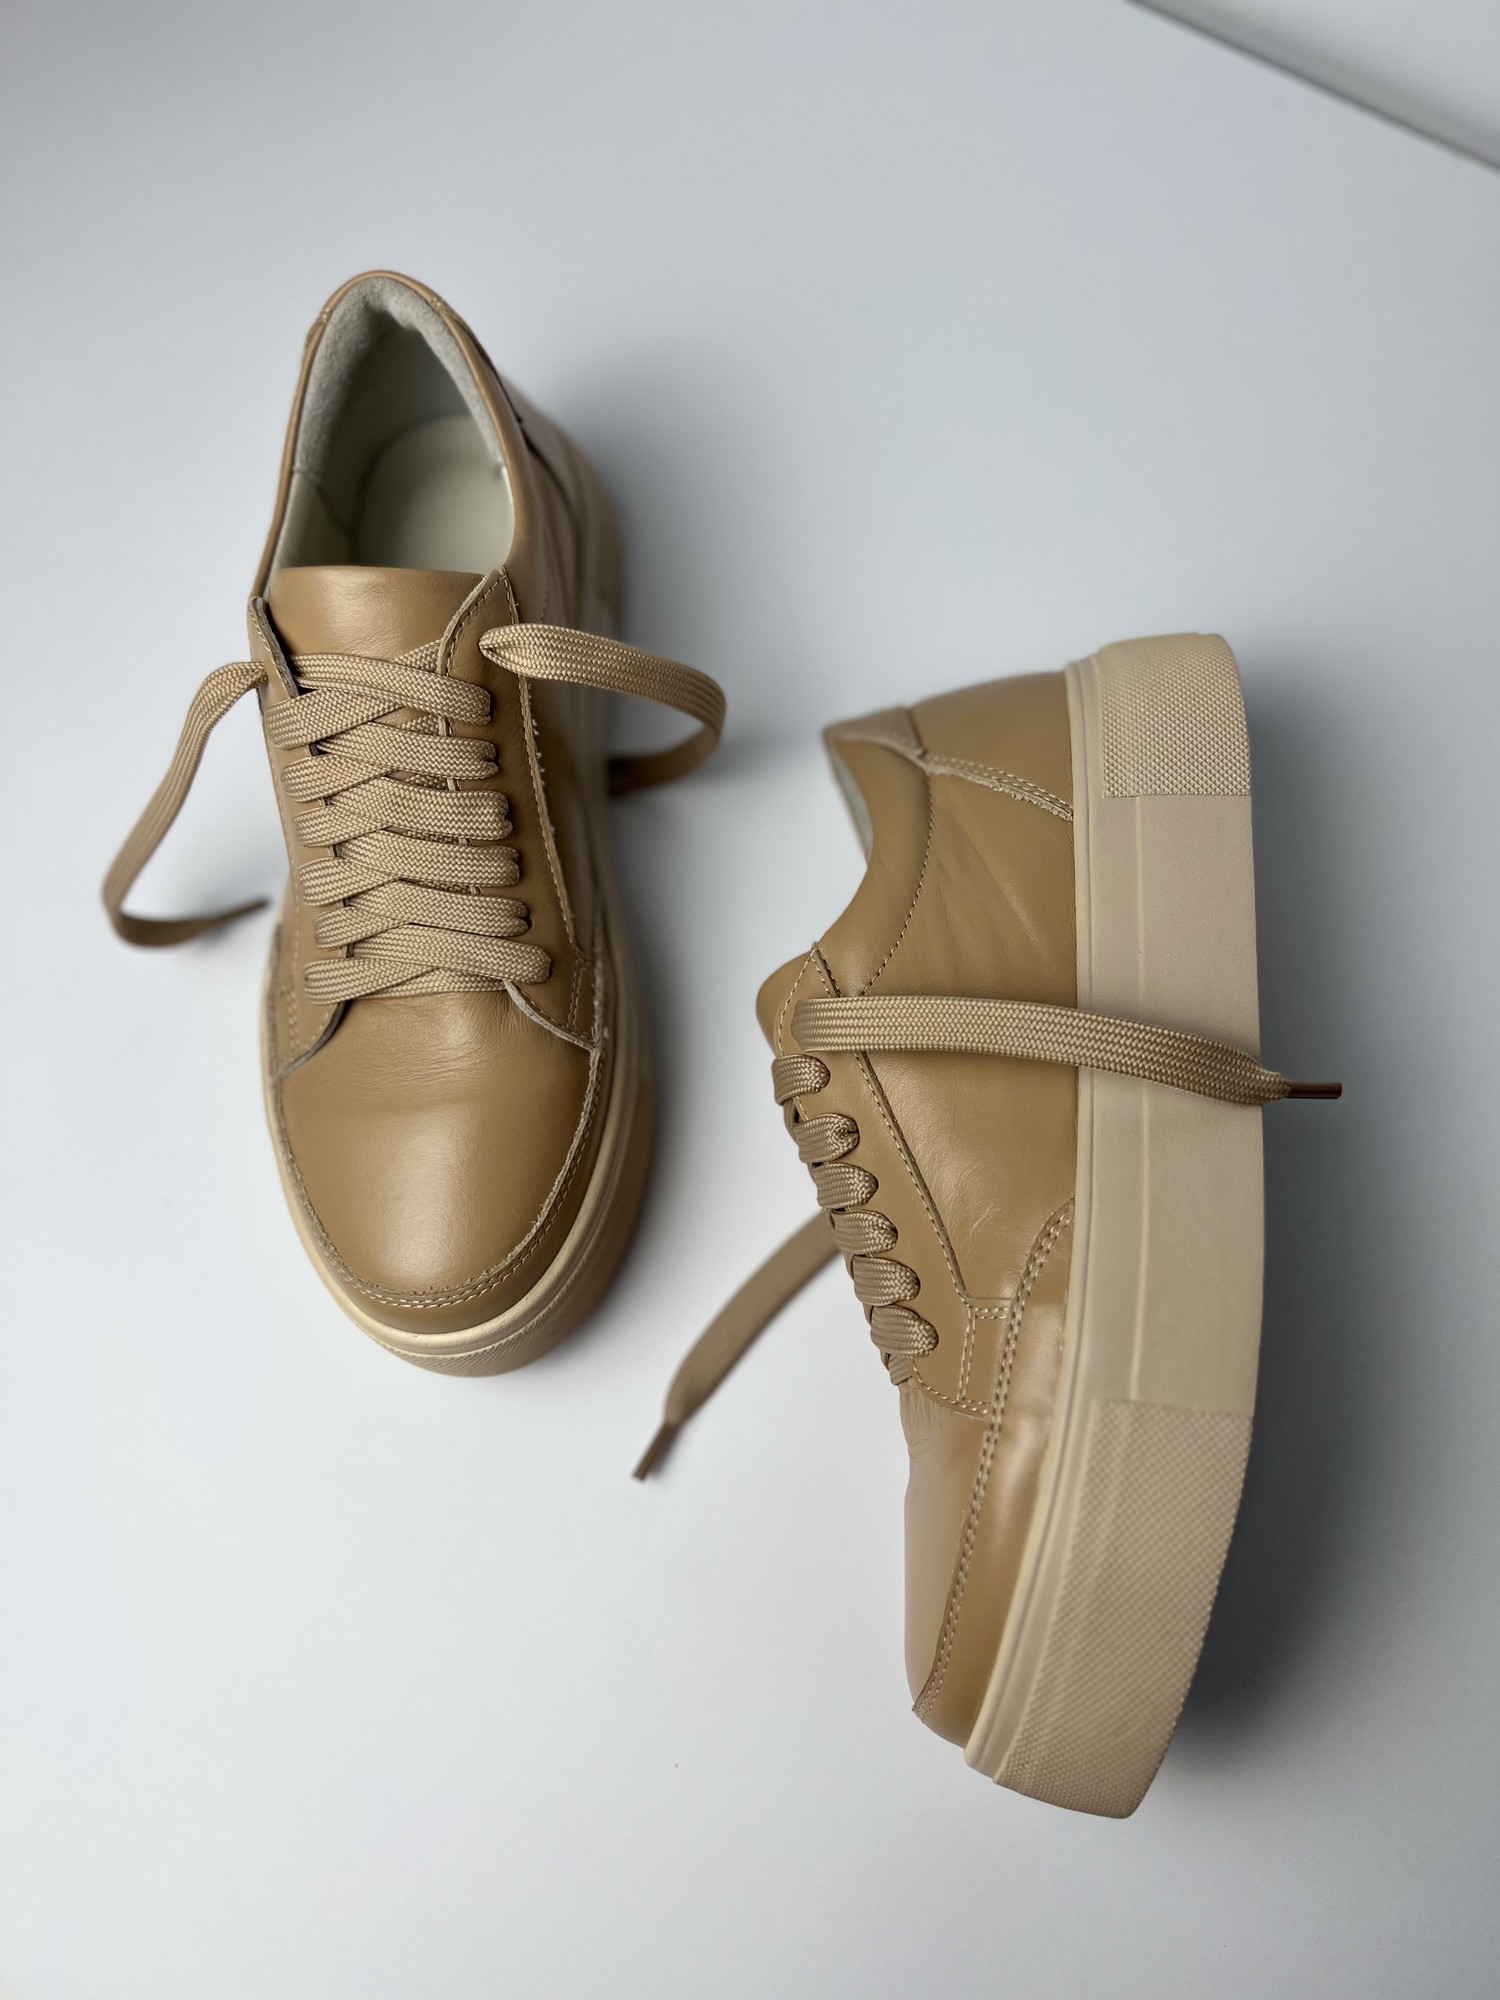 Sneakers made of genuine leather in caramel color